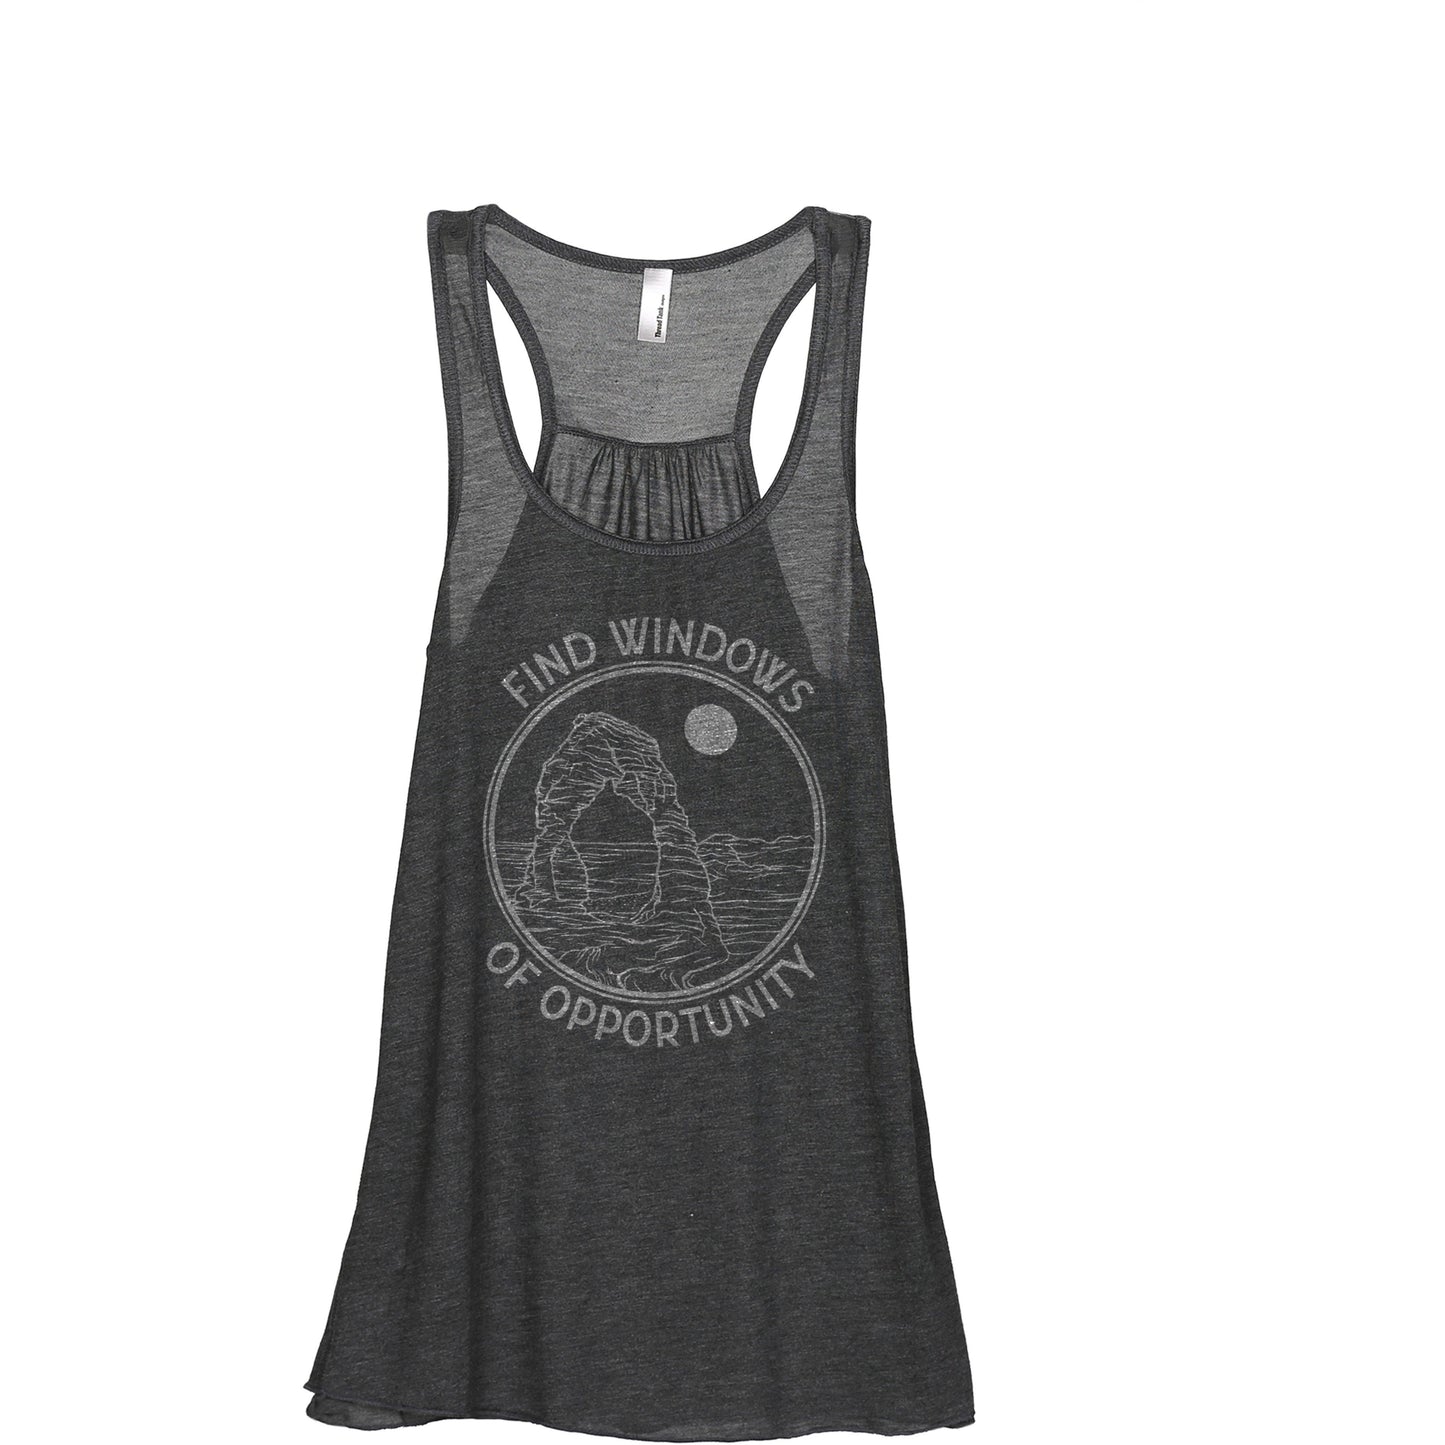 Find Windows Of Opportunity - Arches National Park - thread tank | Stories you can wear.